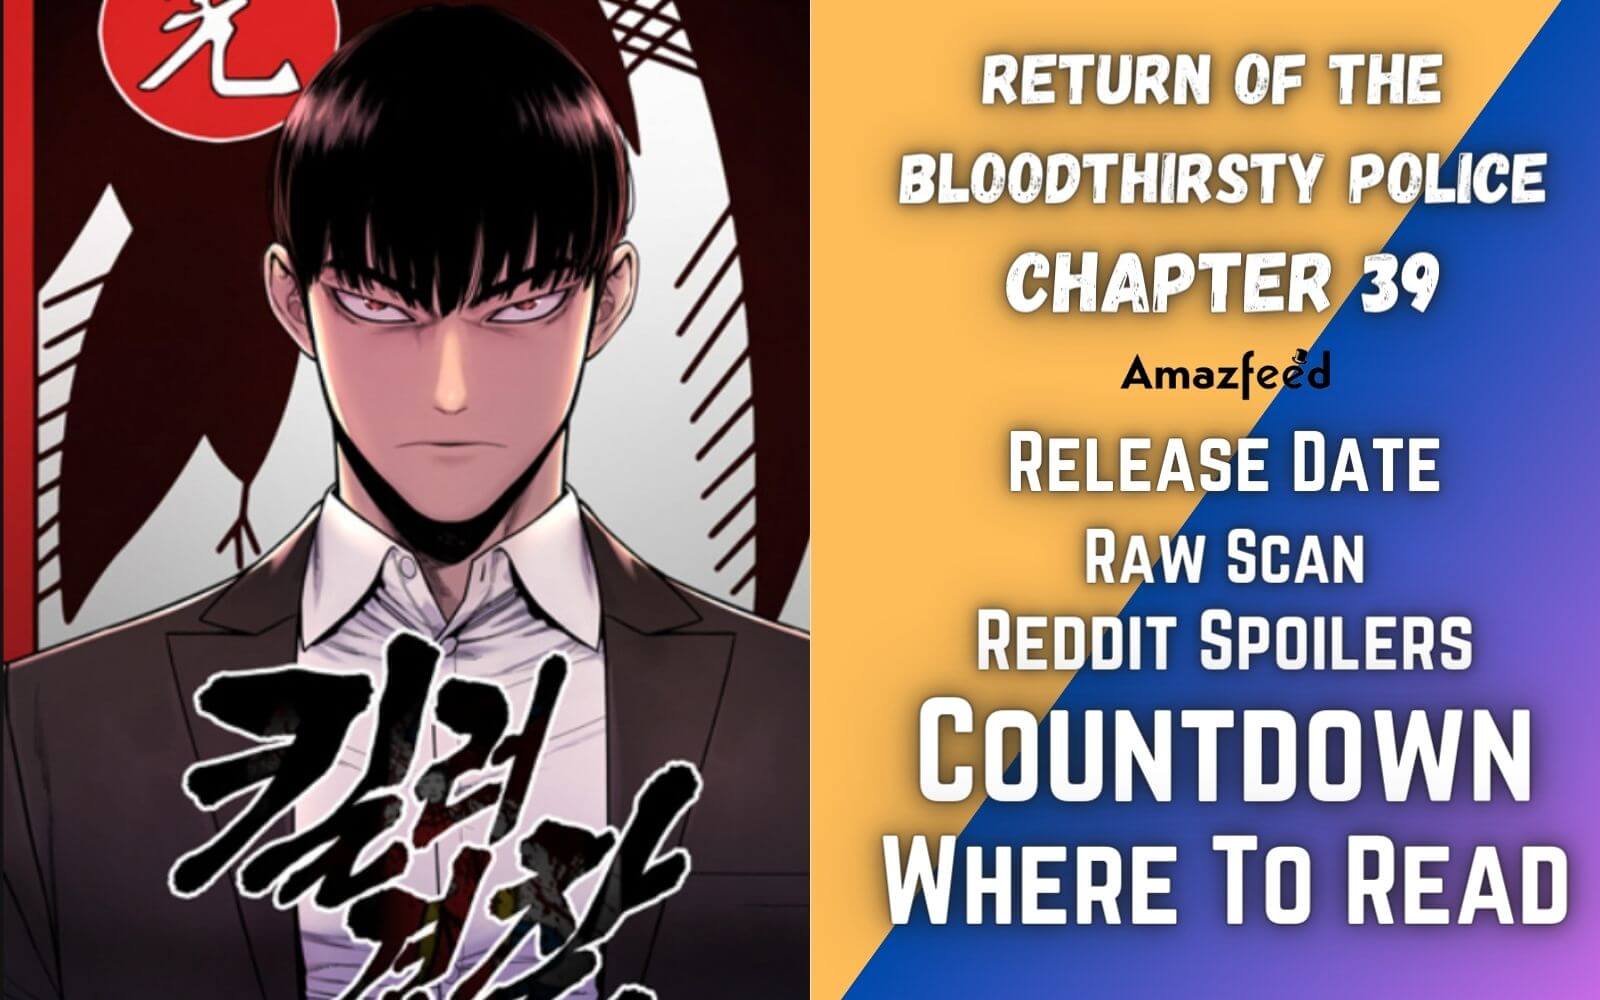 Read Return of the Bloodthirsty Police CHAPTER 39 Online